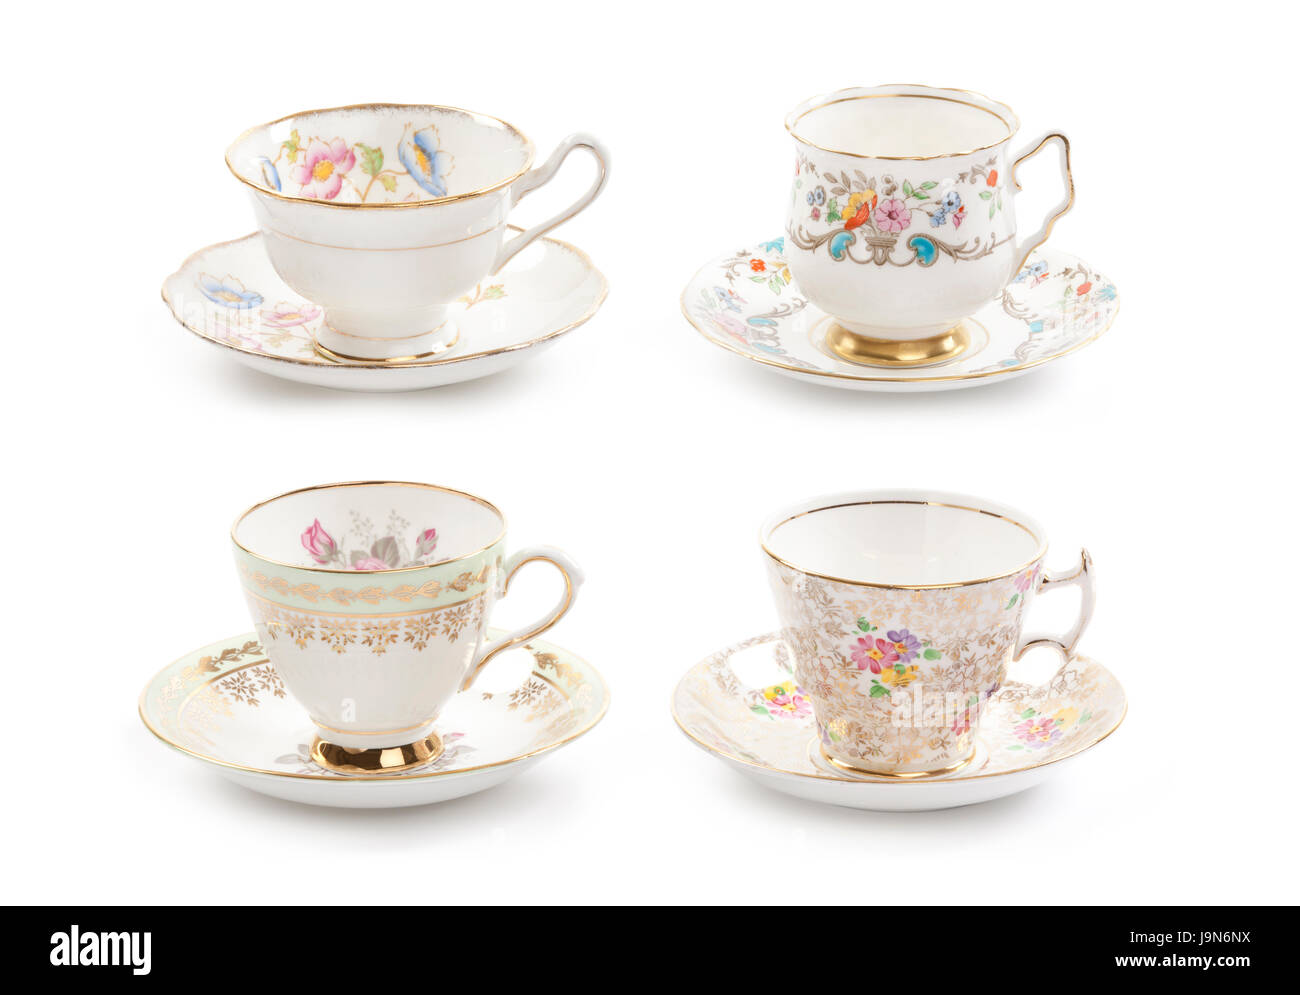 Collection of vintage tea cups Stock Photo